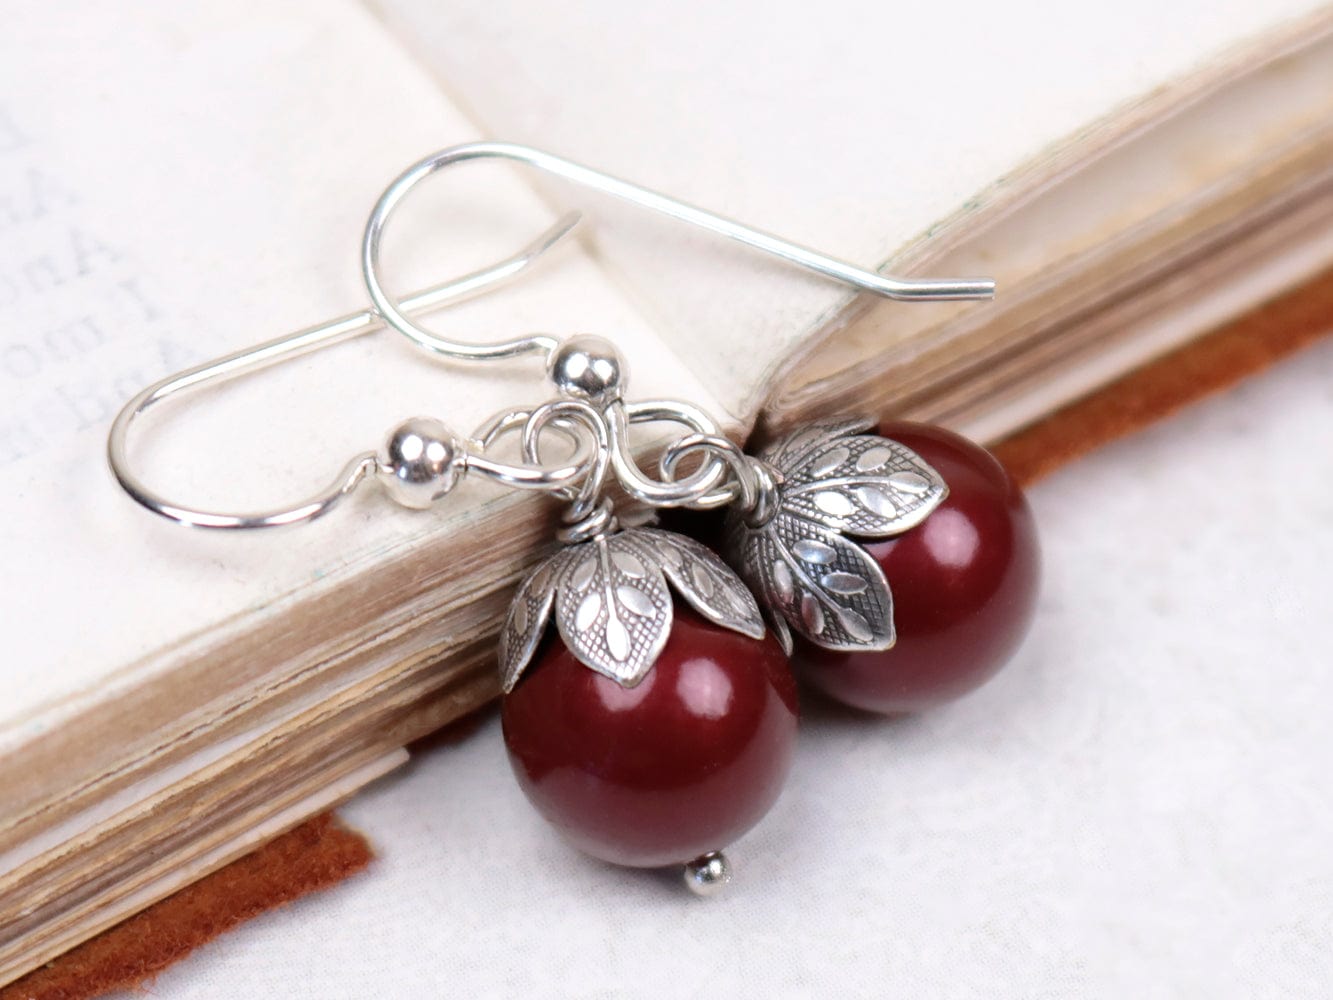 Aquitaine Pearl Drop Earrings in Bordeaux Pearl and Antiqued Silver by Rabbitwood and Reason